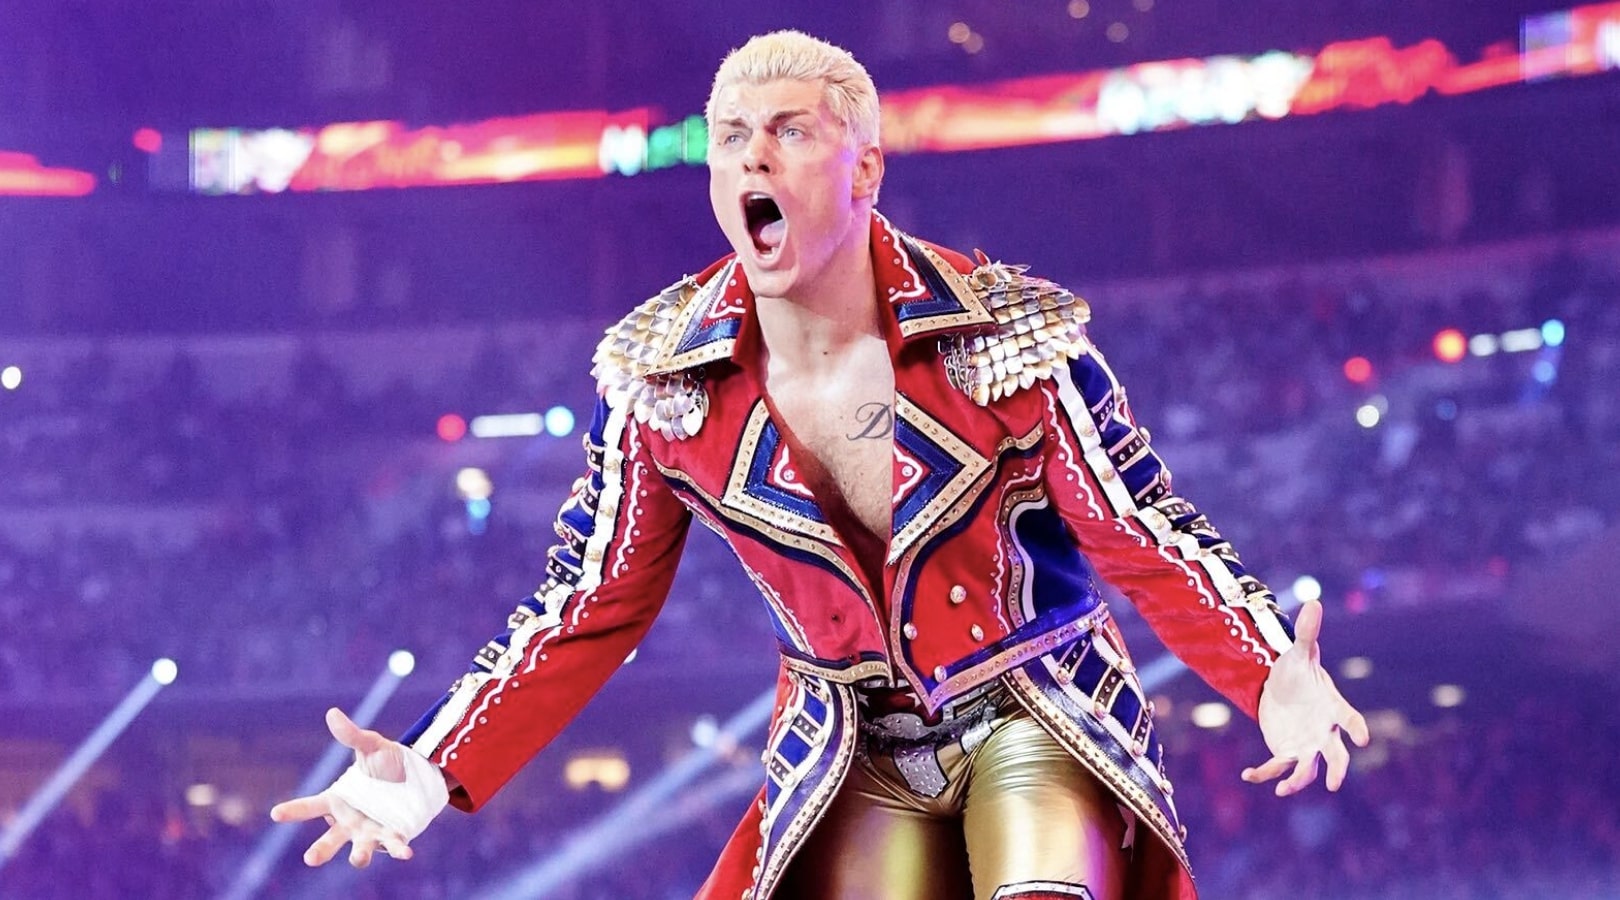 Cody Rhodes Emerges as the Prominent Figure in WWE, According to The Young Bucks